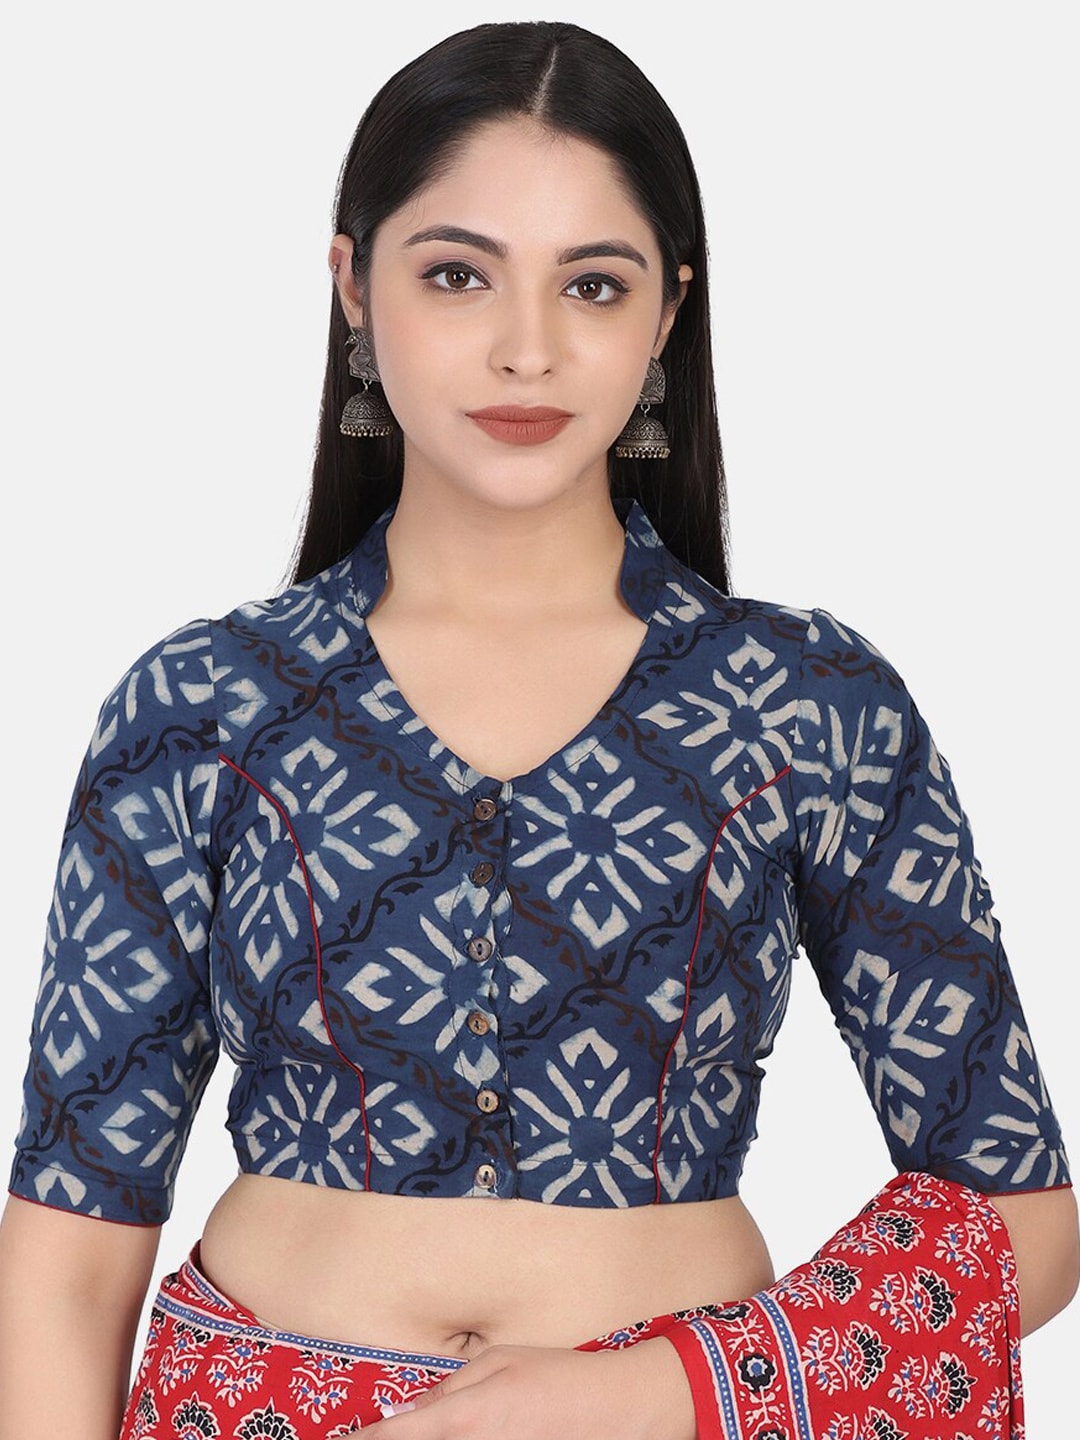 THE WEAVE TRAVELLER Women Blue & White Printed Cotton Saree Blouse Price in India